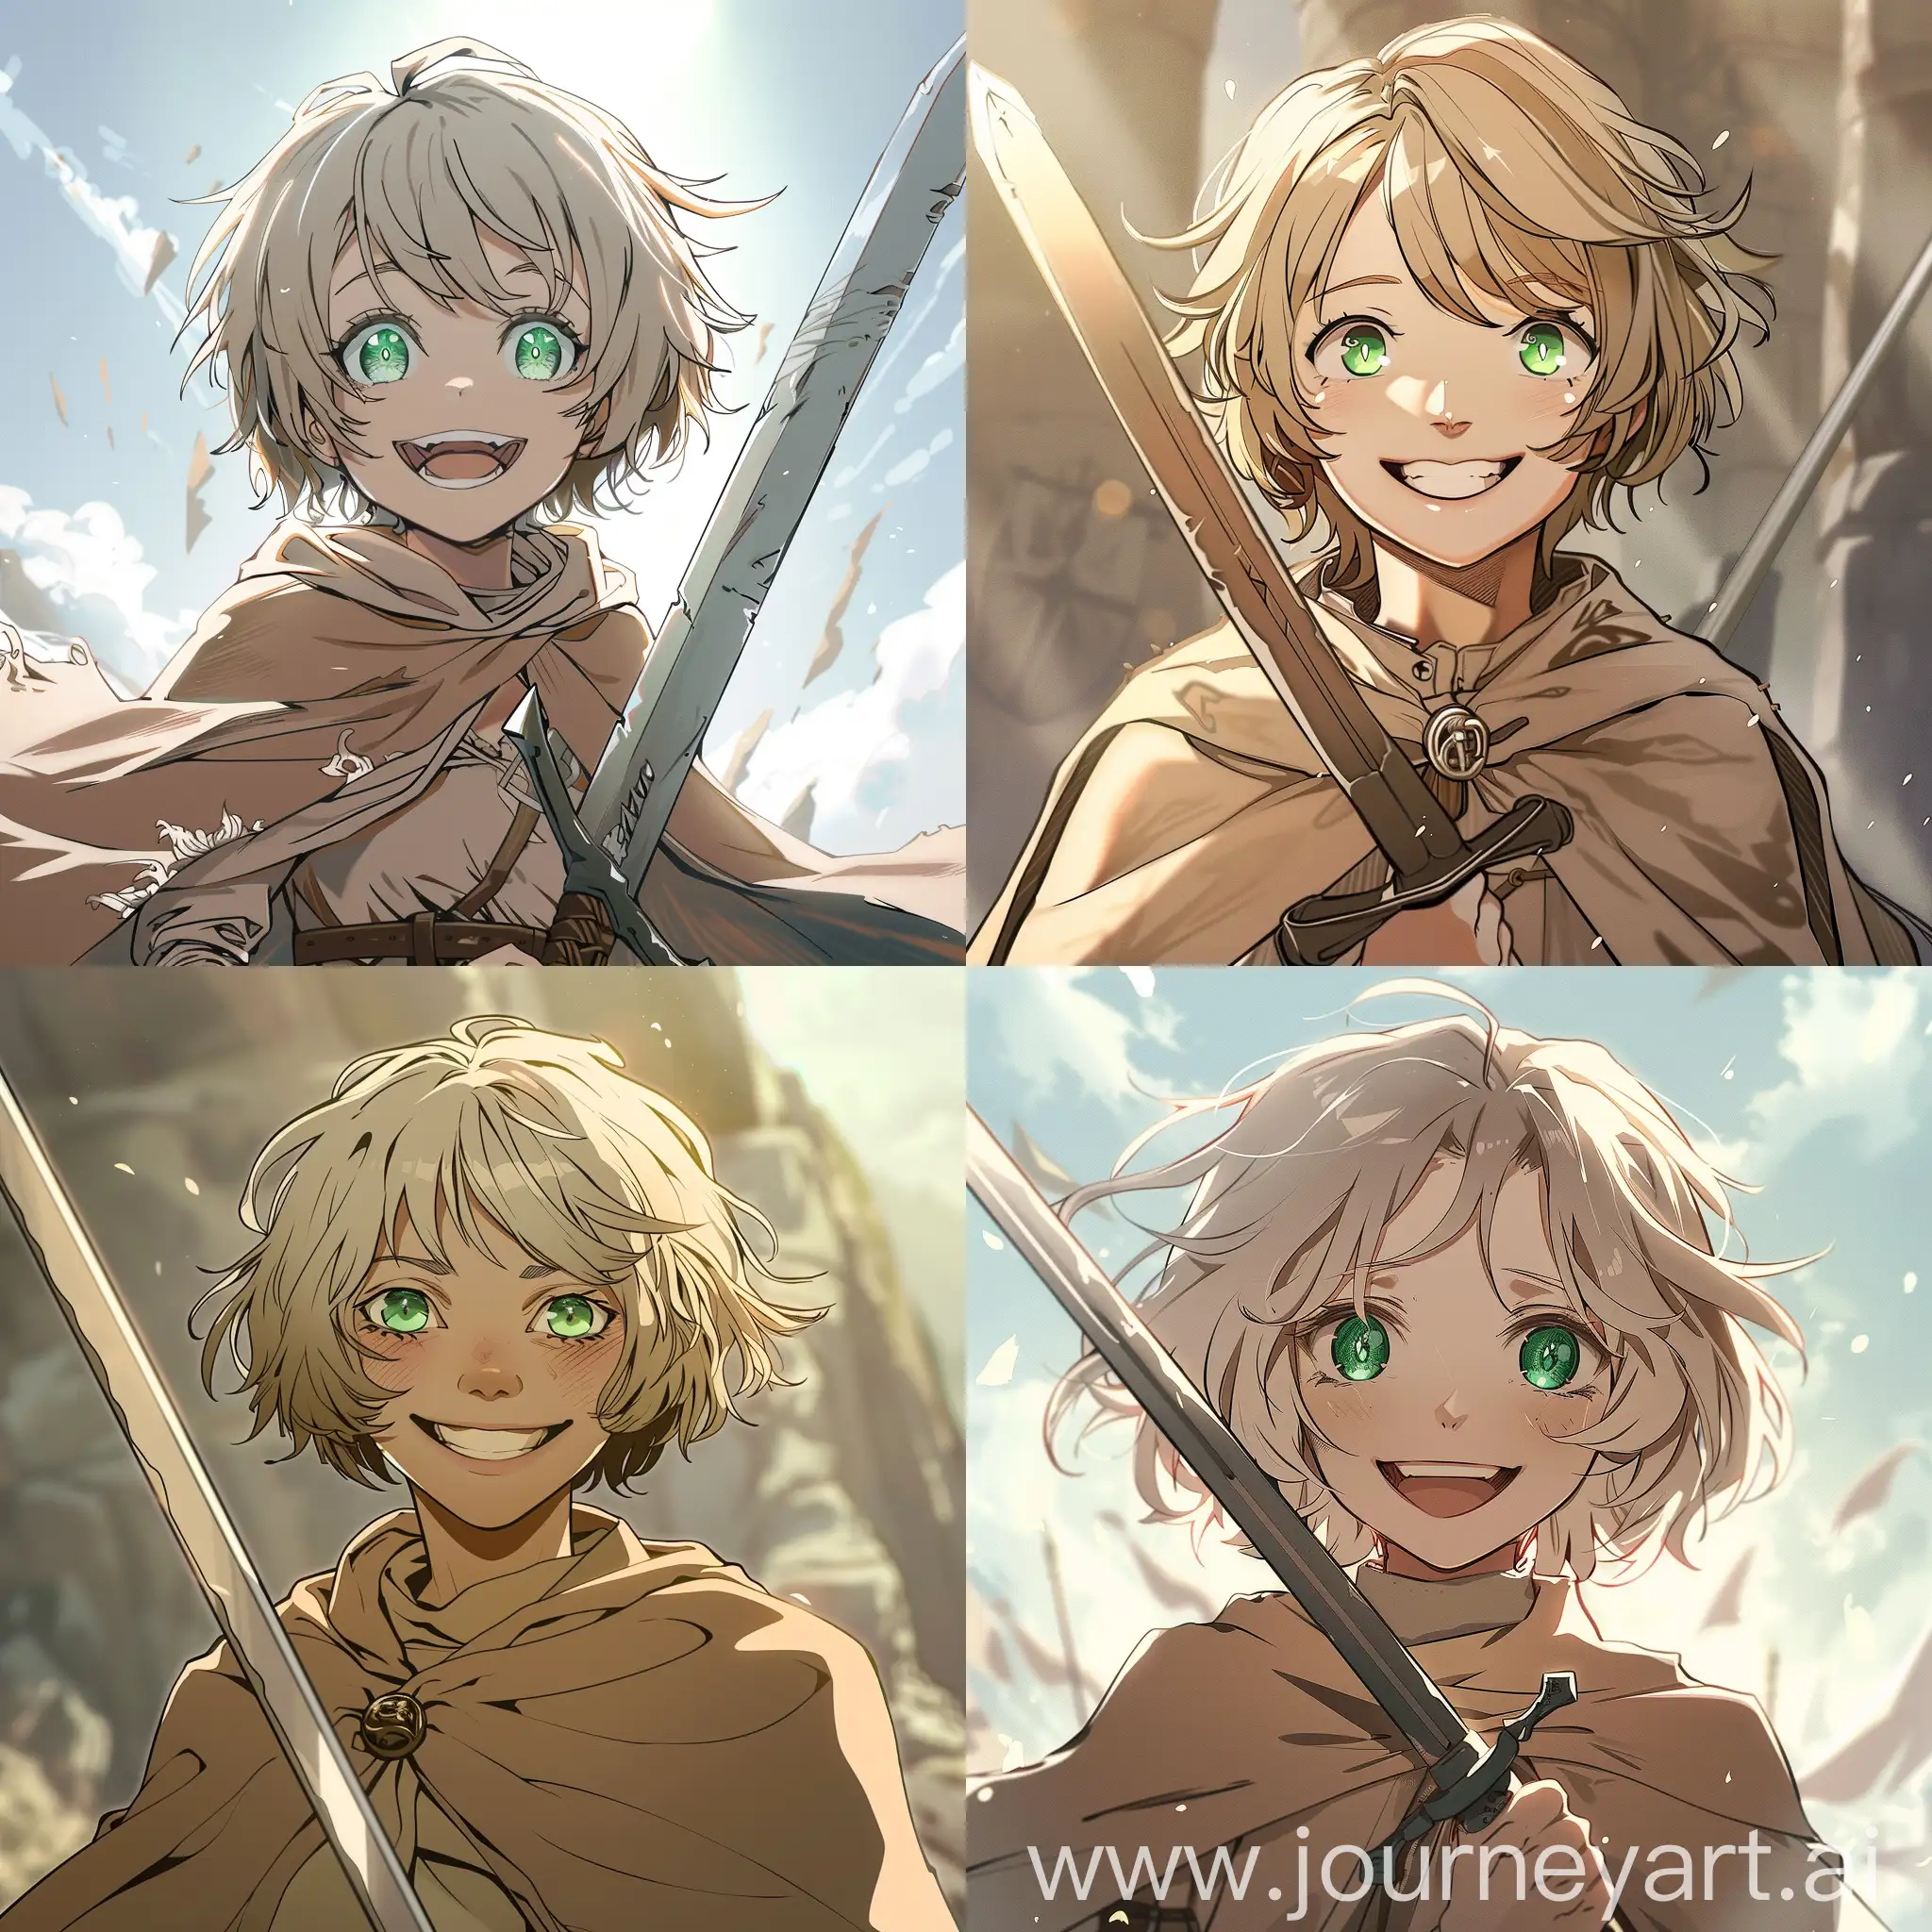 Cheerful-Anime-Girl-Warrior-with-Short-Blond-Hair-and-Sword